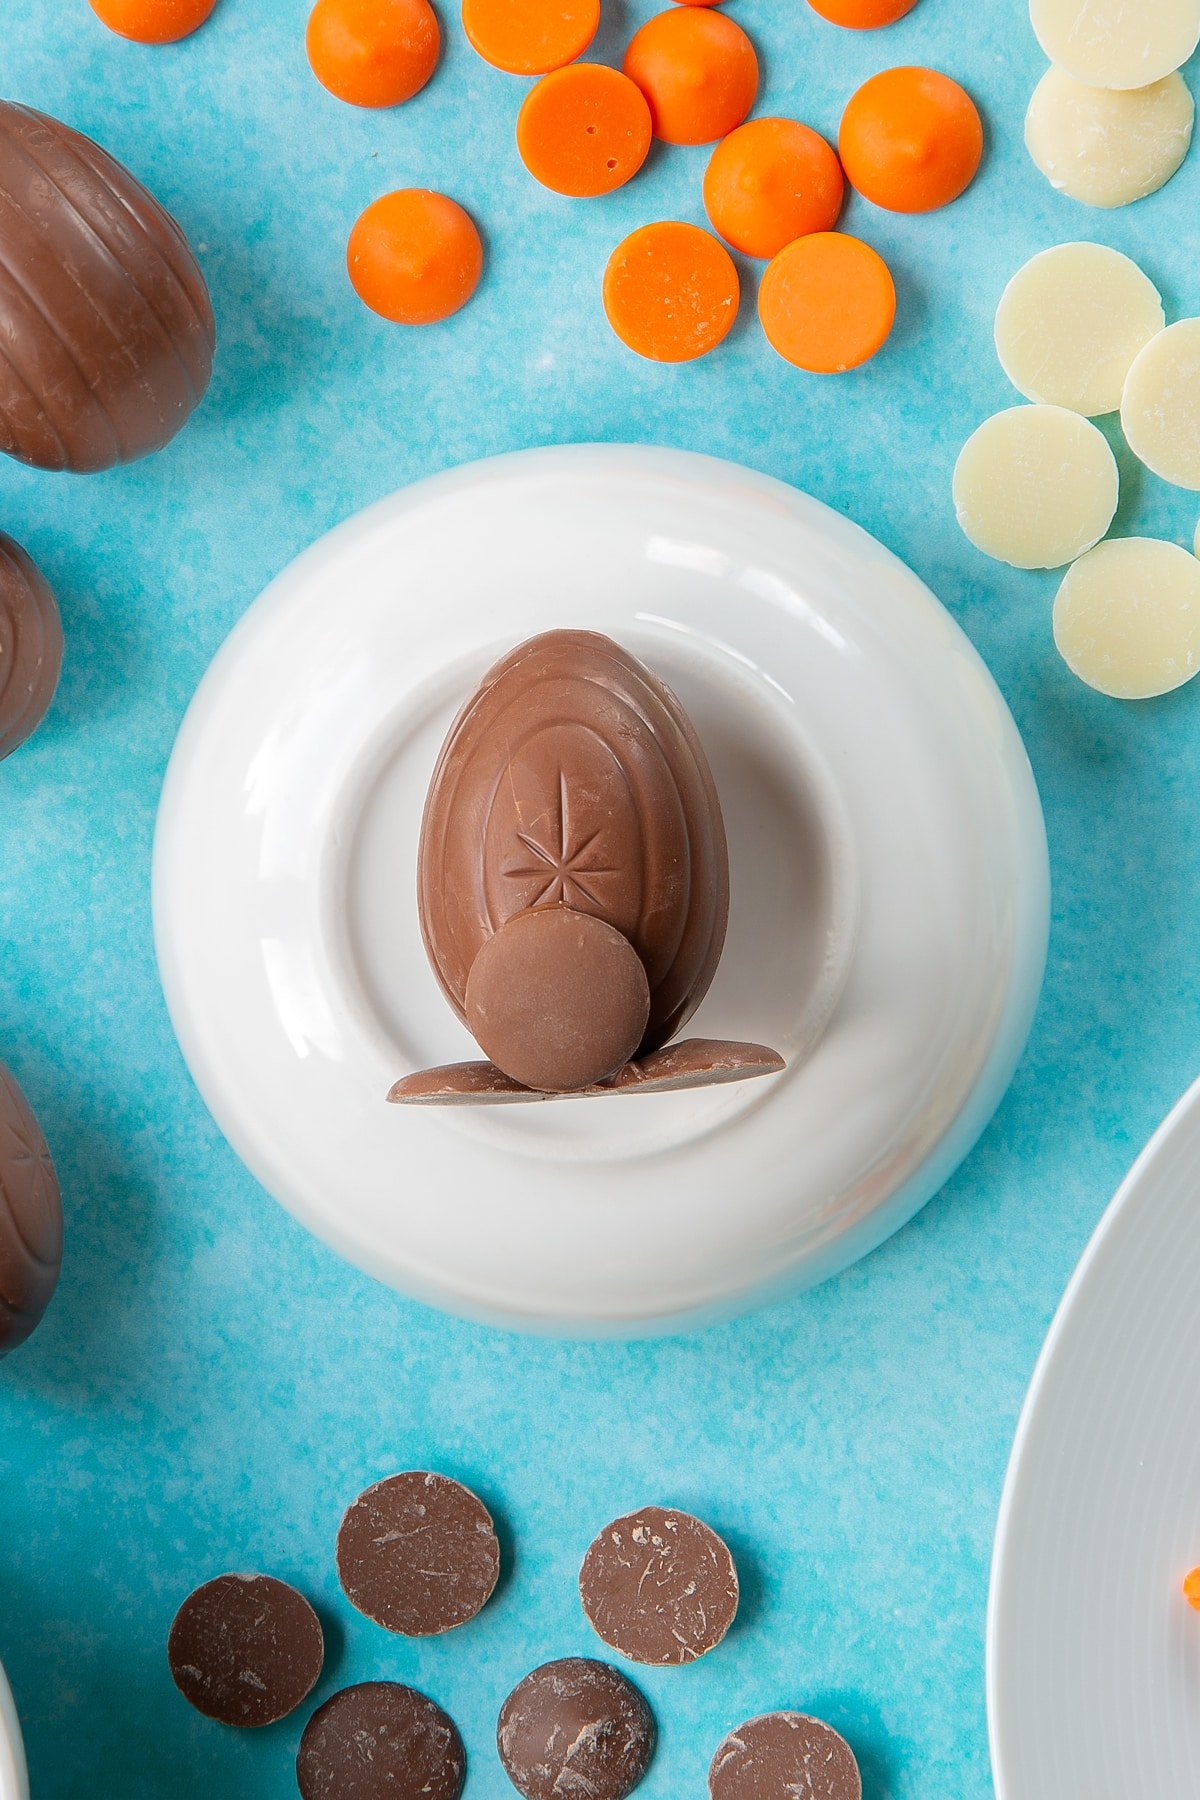 Two chocolate buttons stuck to the bottom of a creme egg to resemble feet. The egg lays on an upturned white bowl. Another chocolate button is stuck to the egg to resemble a tail. The bowl is surrounded by ingredients to make chocolate chicks.